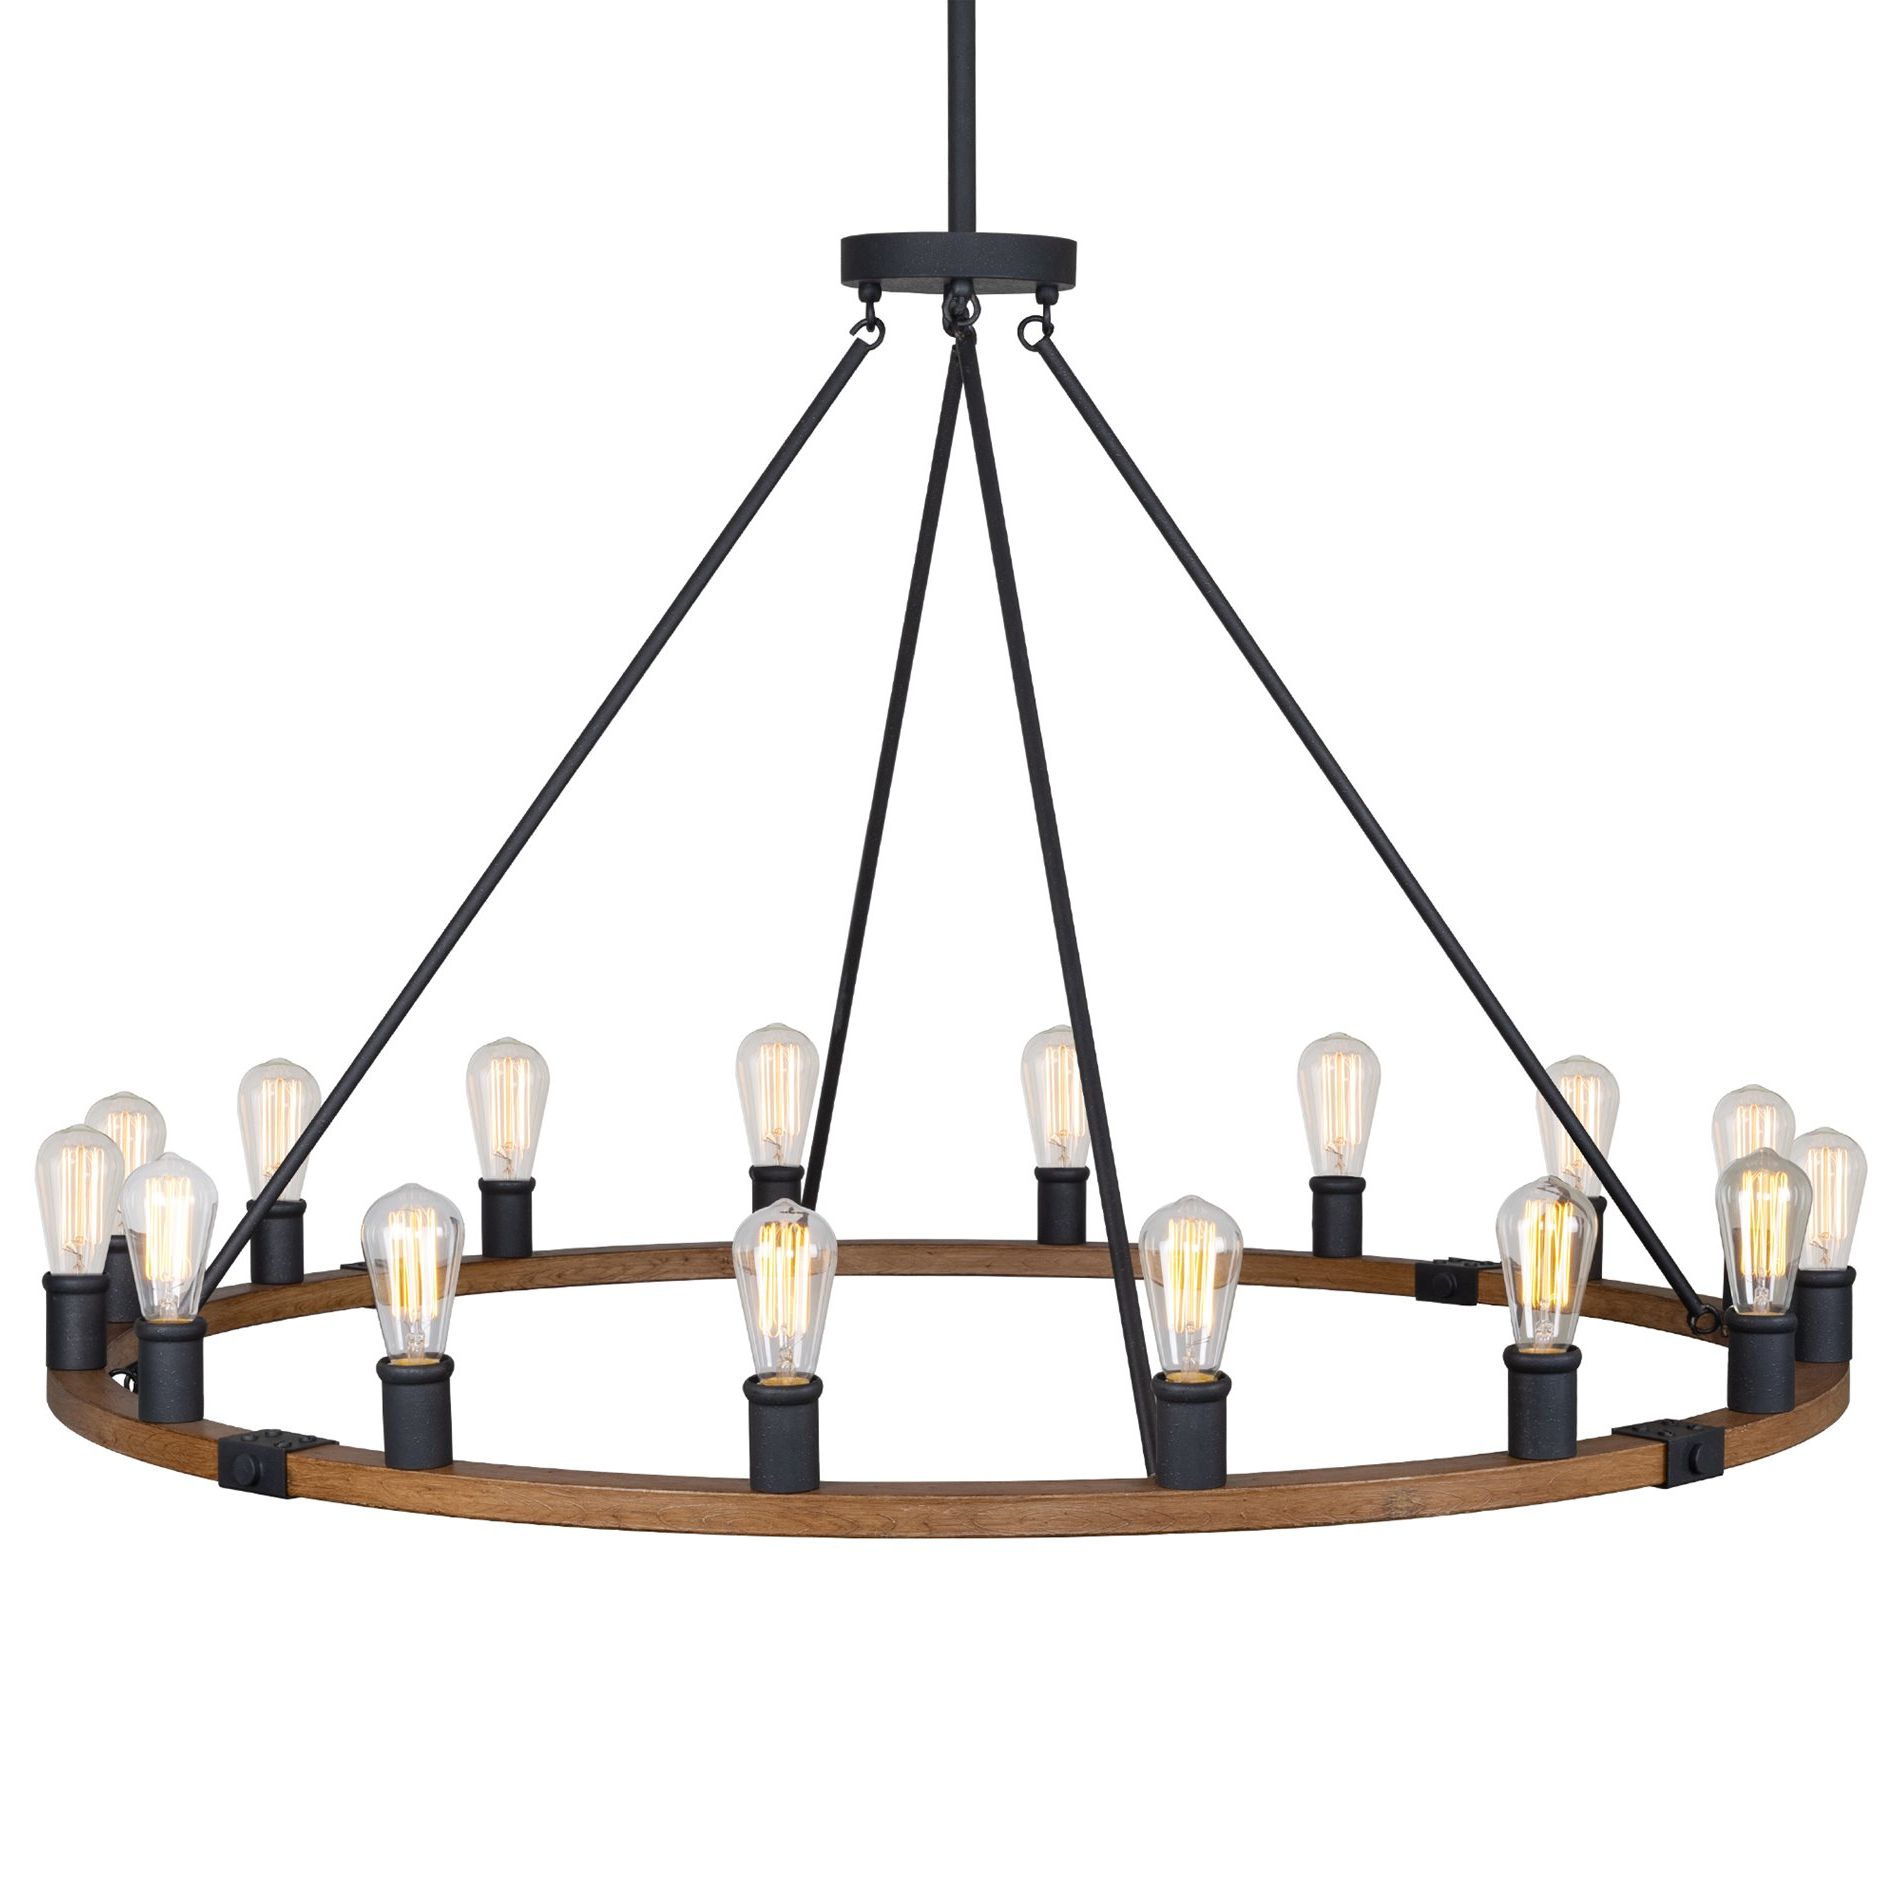 Kira Home Jericho 48" Rustic Farmhouse Wagon Wheel Pertaining To Most Up To Date Weathered Oak Kitchen Island Light Chandeliers (View 11 of 15)